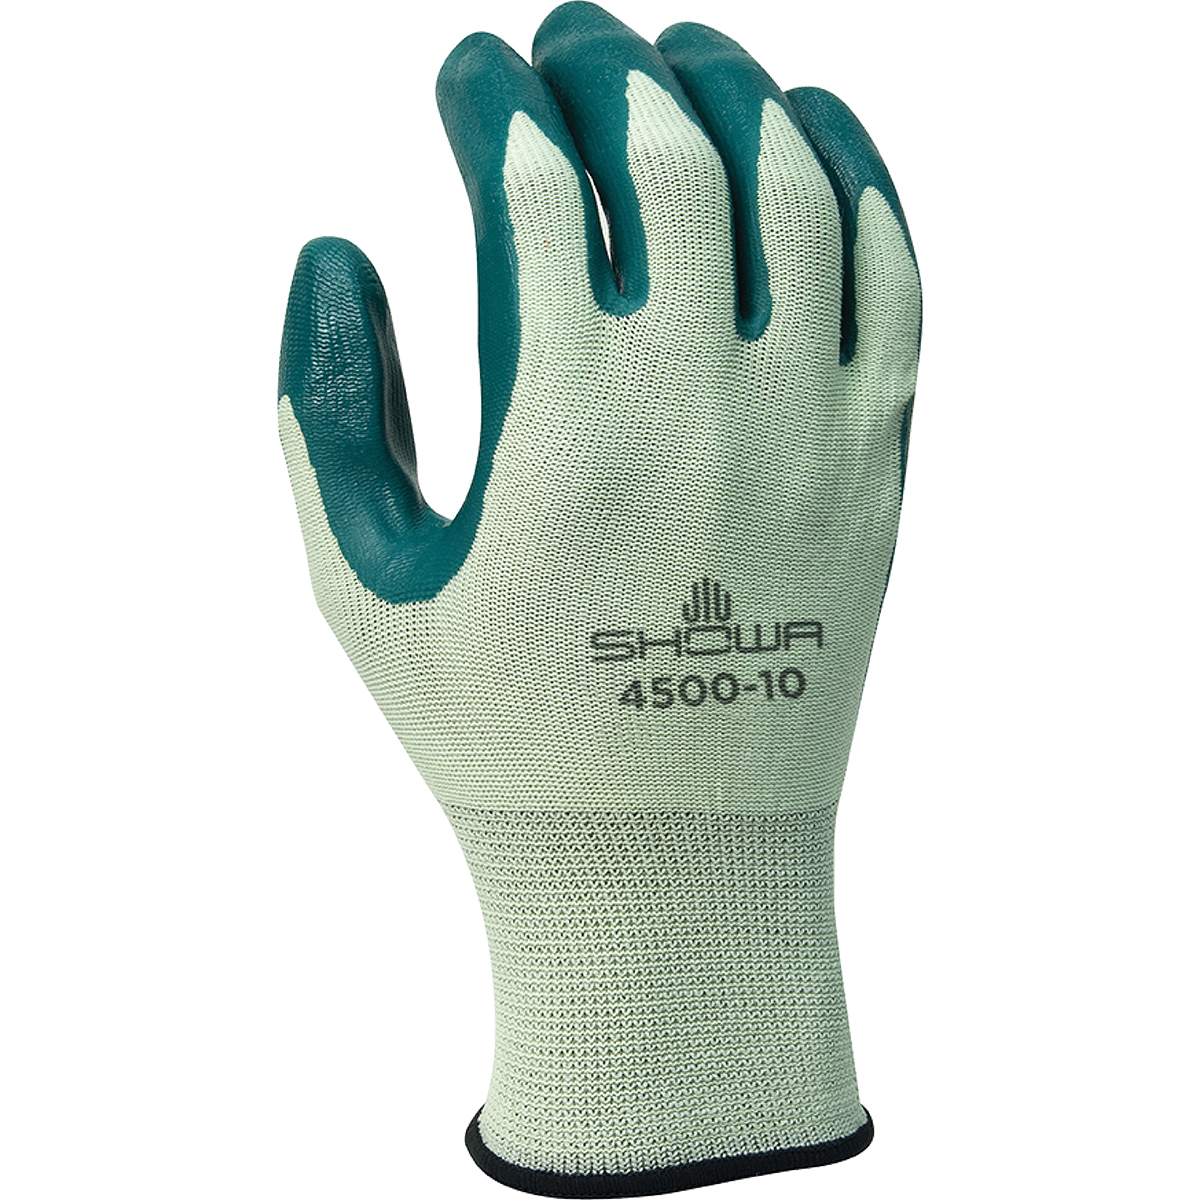 SHOWA® Size 10 Nitrile Palm Coated Work Gloves With Nylon Knit Liner And Knit Wrist